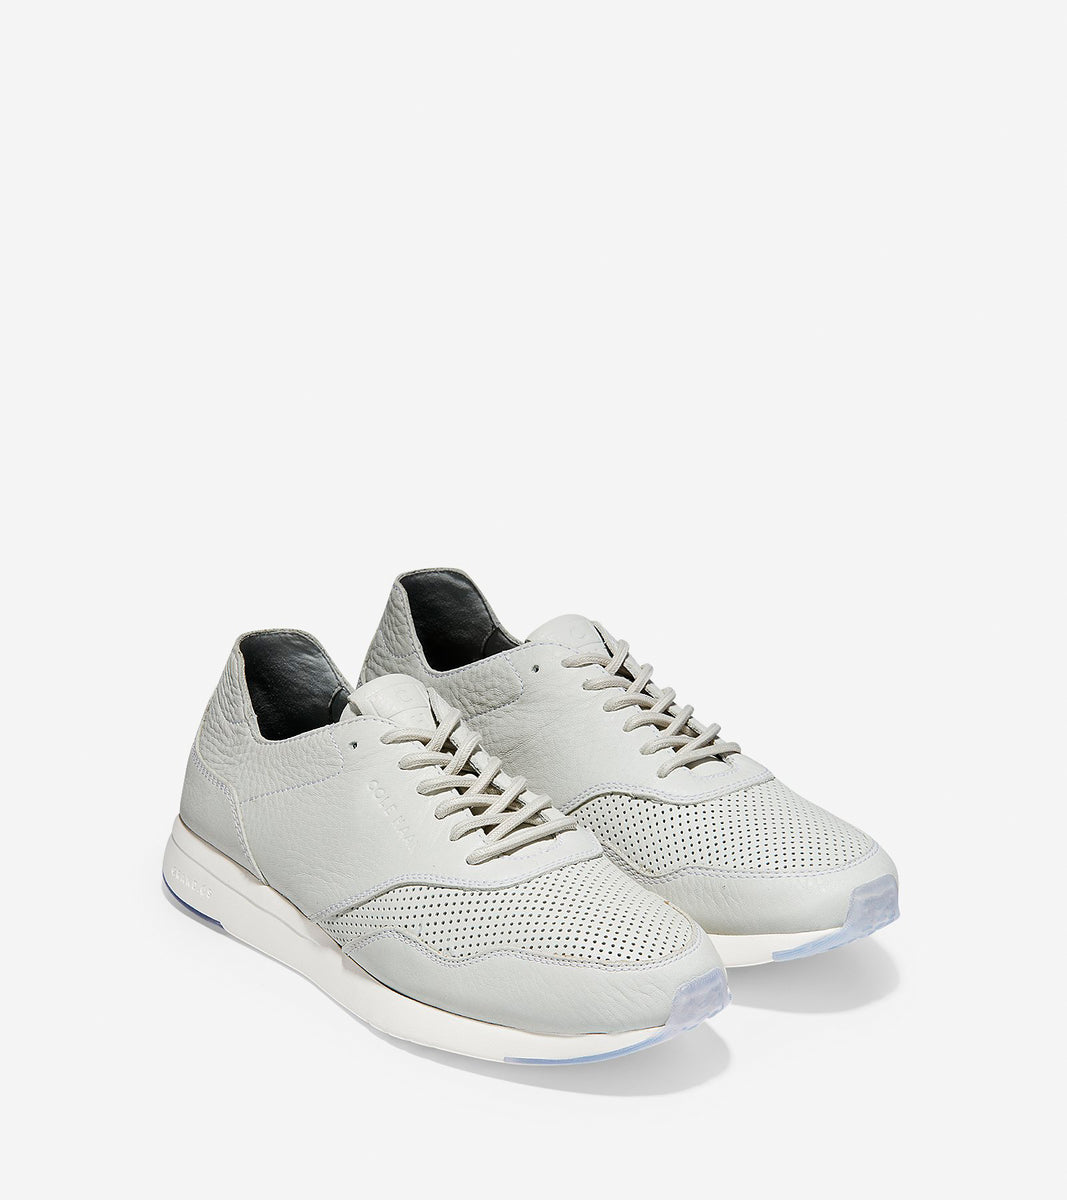 ColeHaan-GrandPrø Running Sneaker-c27275-Chalk Tumbled Perforated Leather